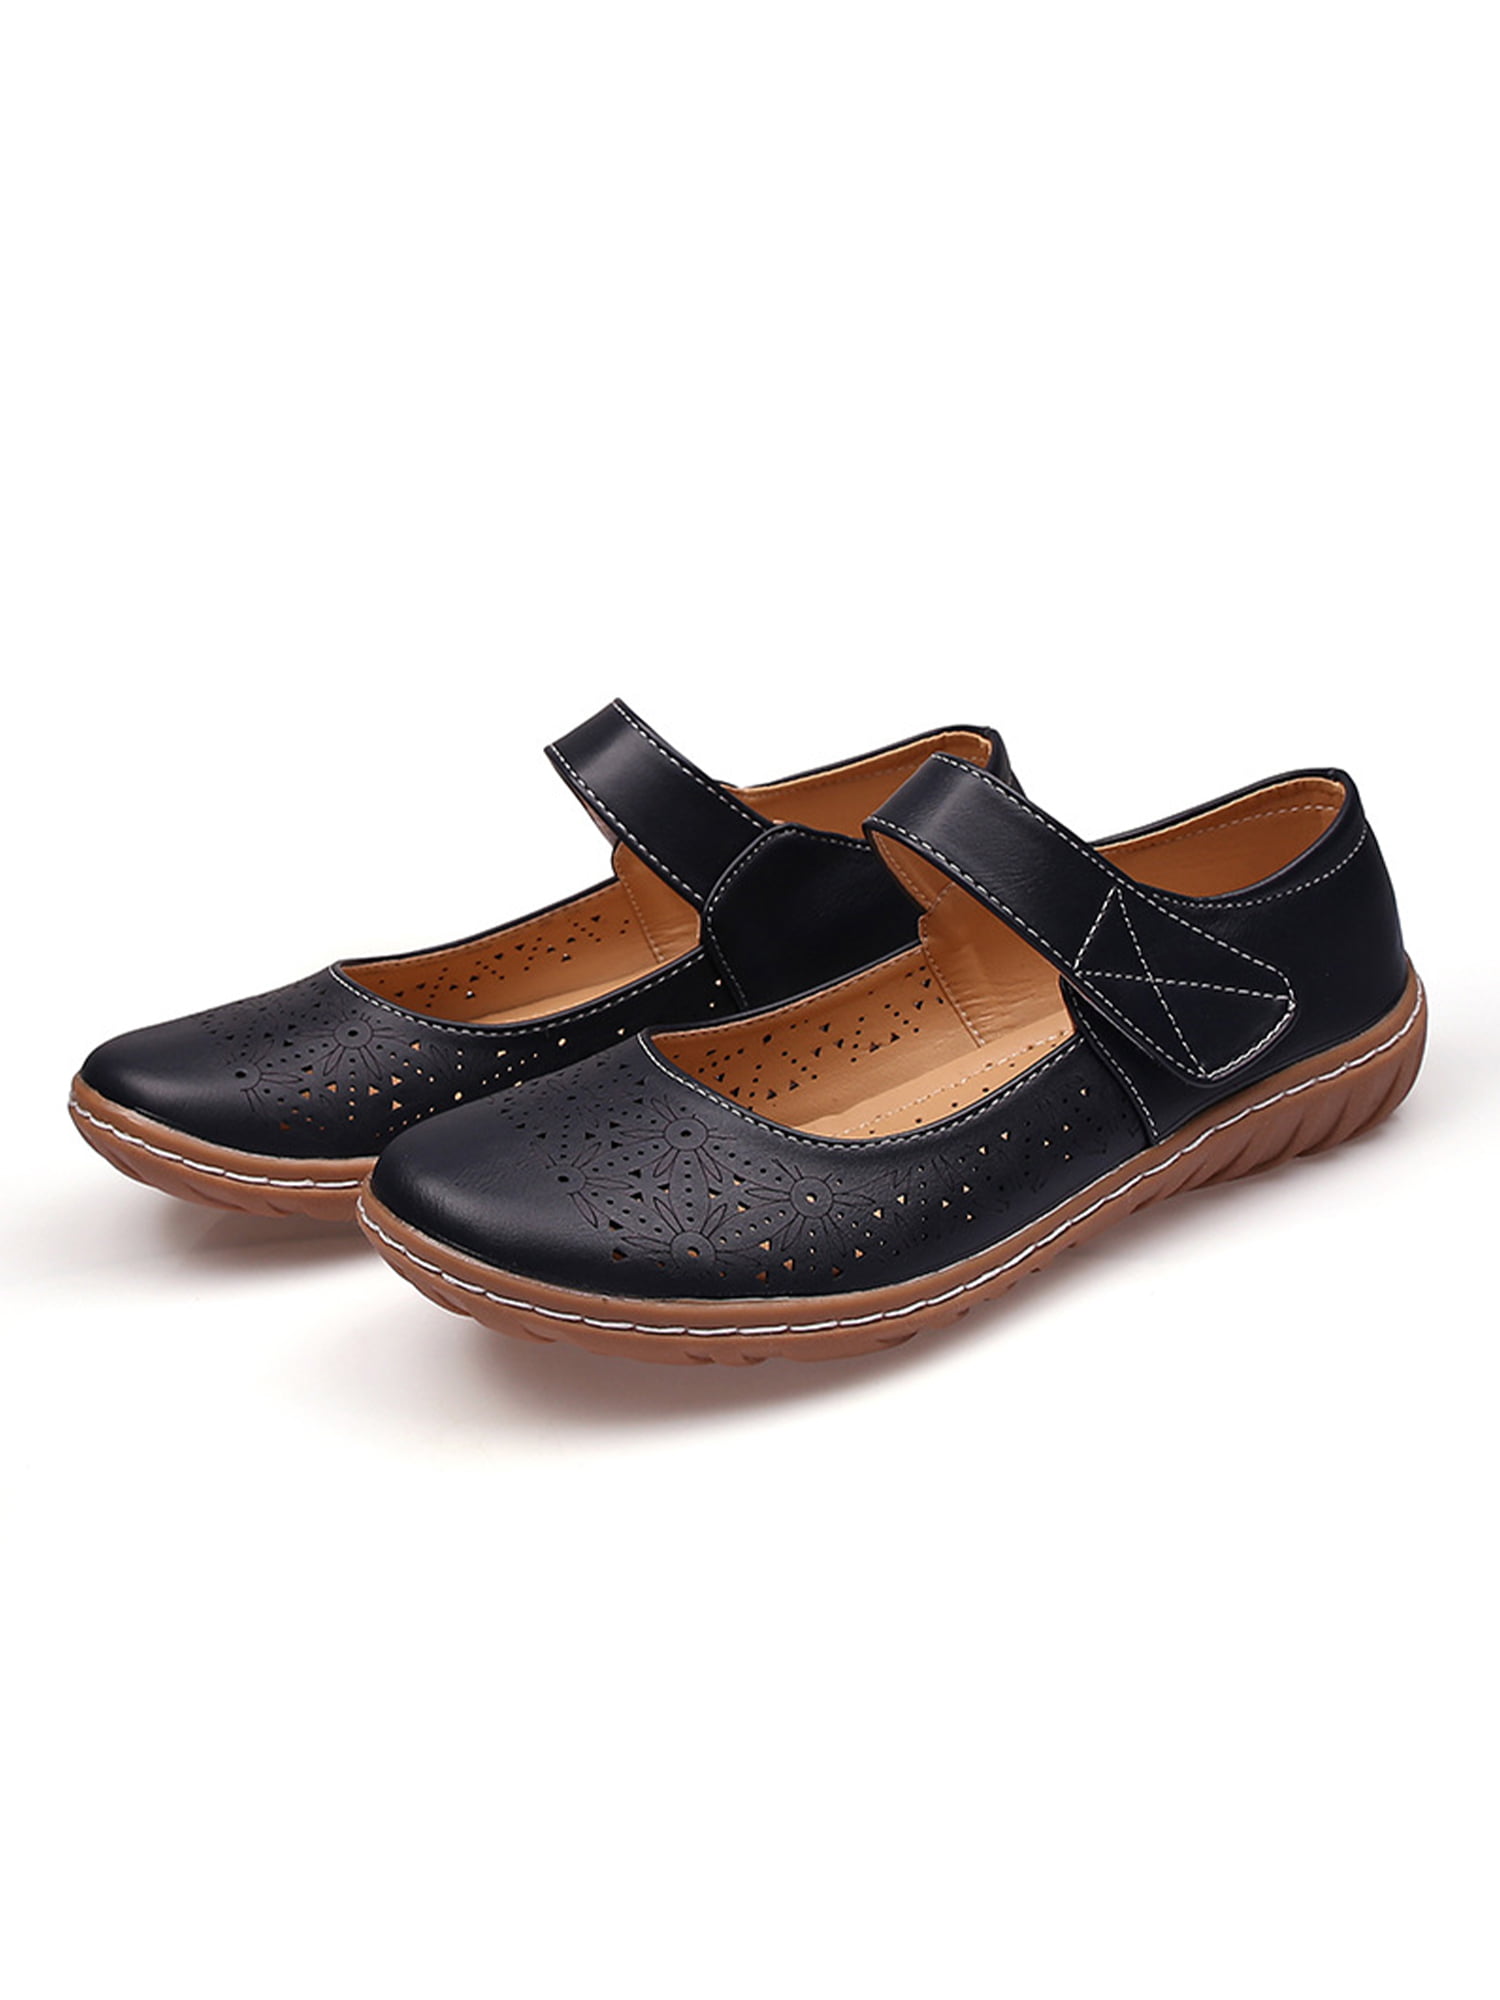 Fashion Soft Sole Flat Sandals Women's Mules & Clogs Breathable Hollow Slip-on Loafers Indoor & Outdoor Casual Walking Shoes 